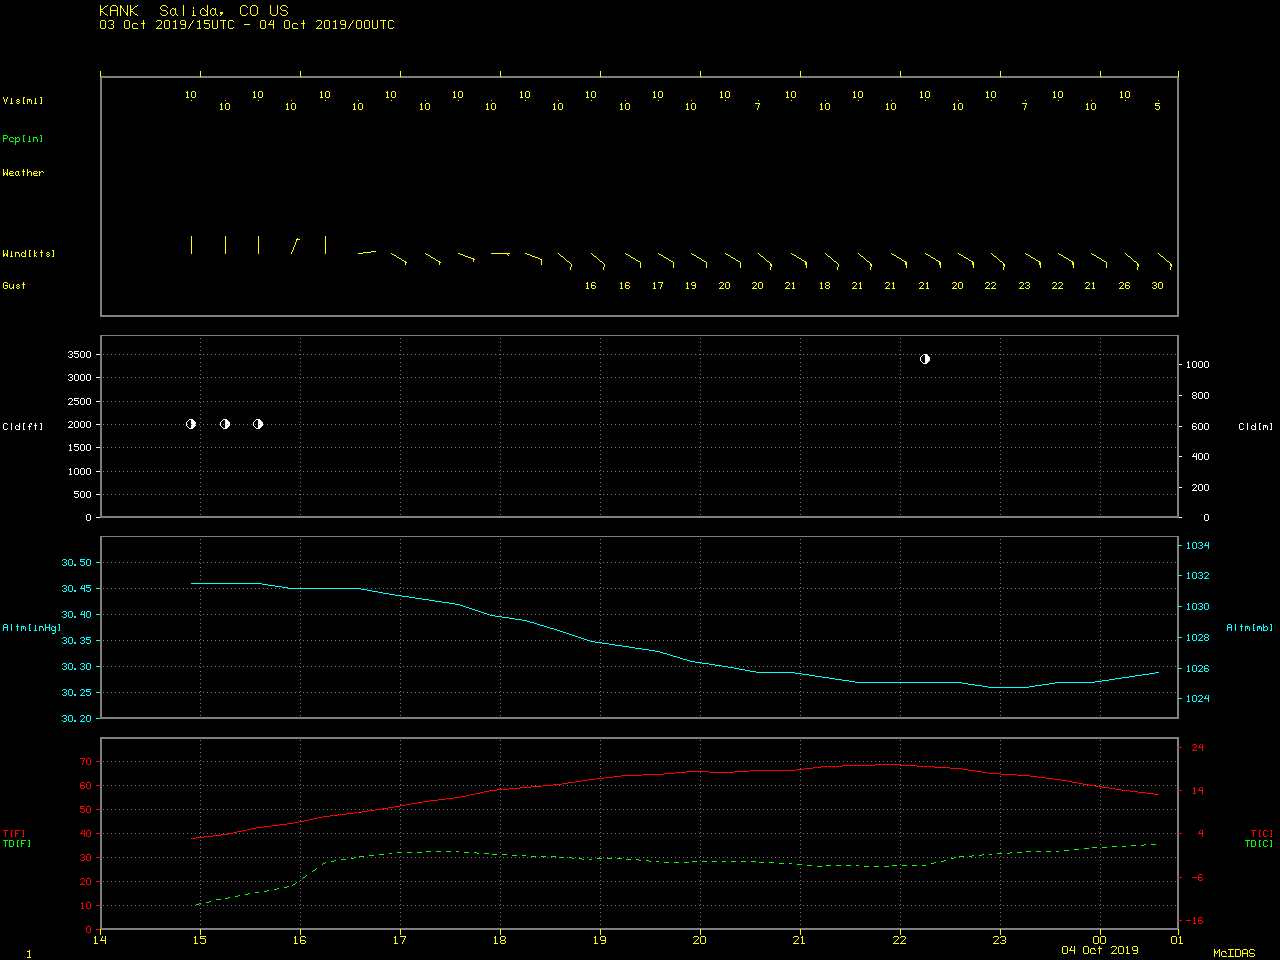 Time series of surface observation data from Salida, Colorado [click to enlarge]